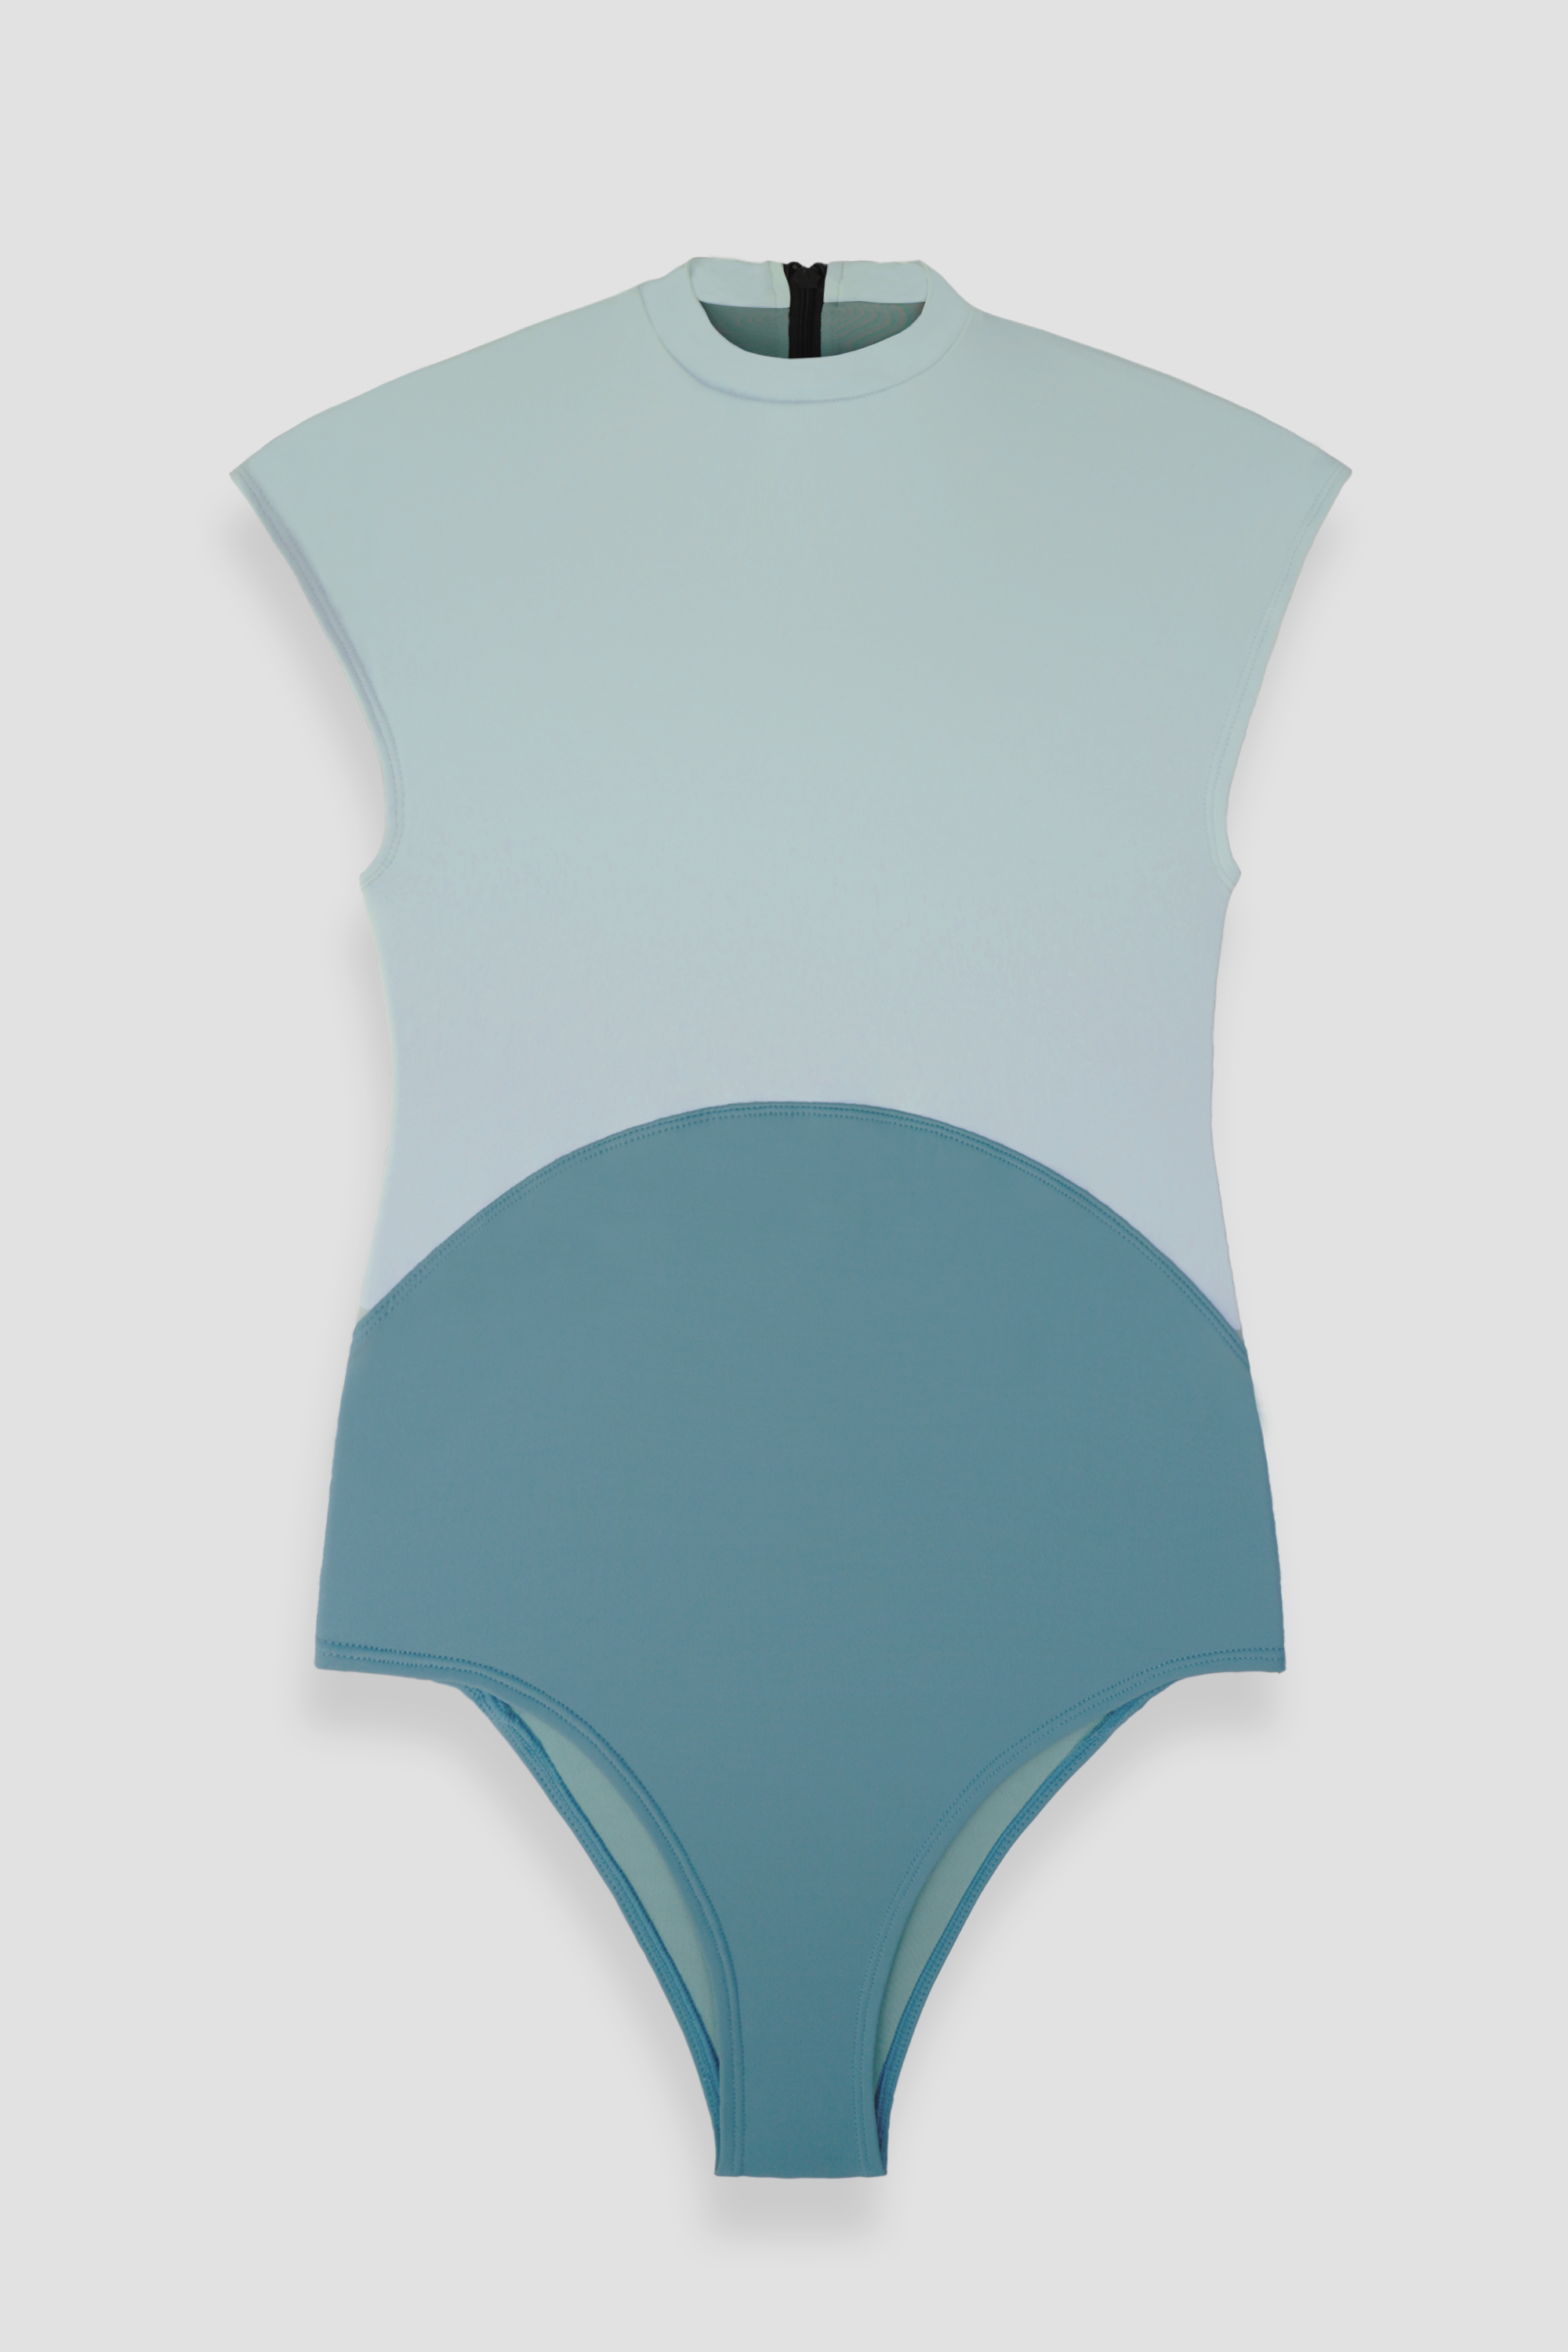 Marosi Surf Swimsuit Onepiece in Mint Green